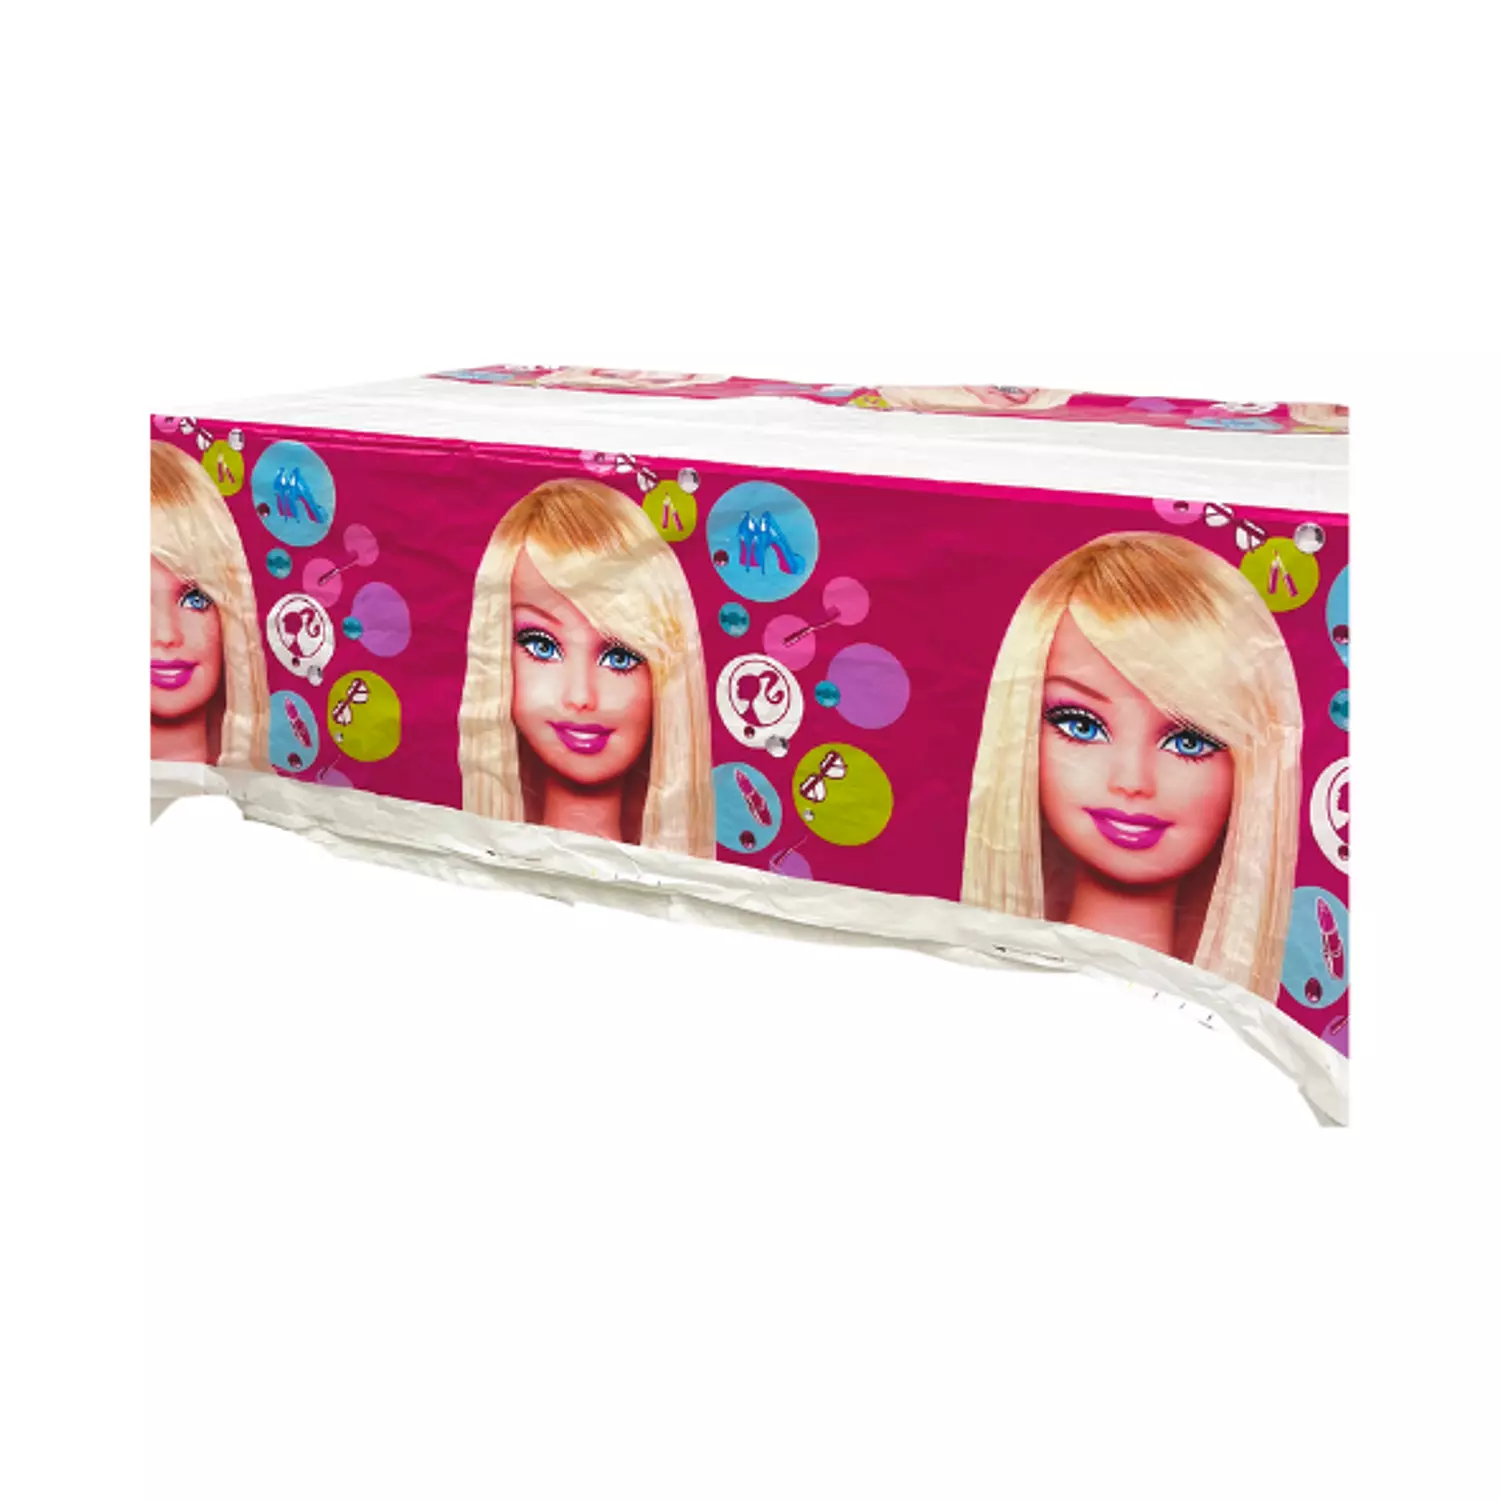 Barbie Tablecloth hover image